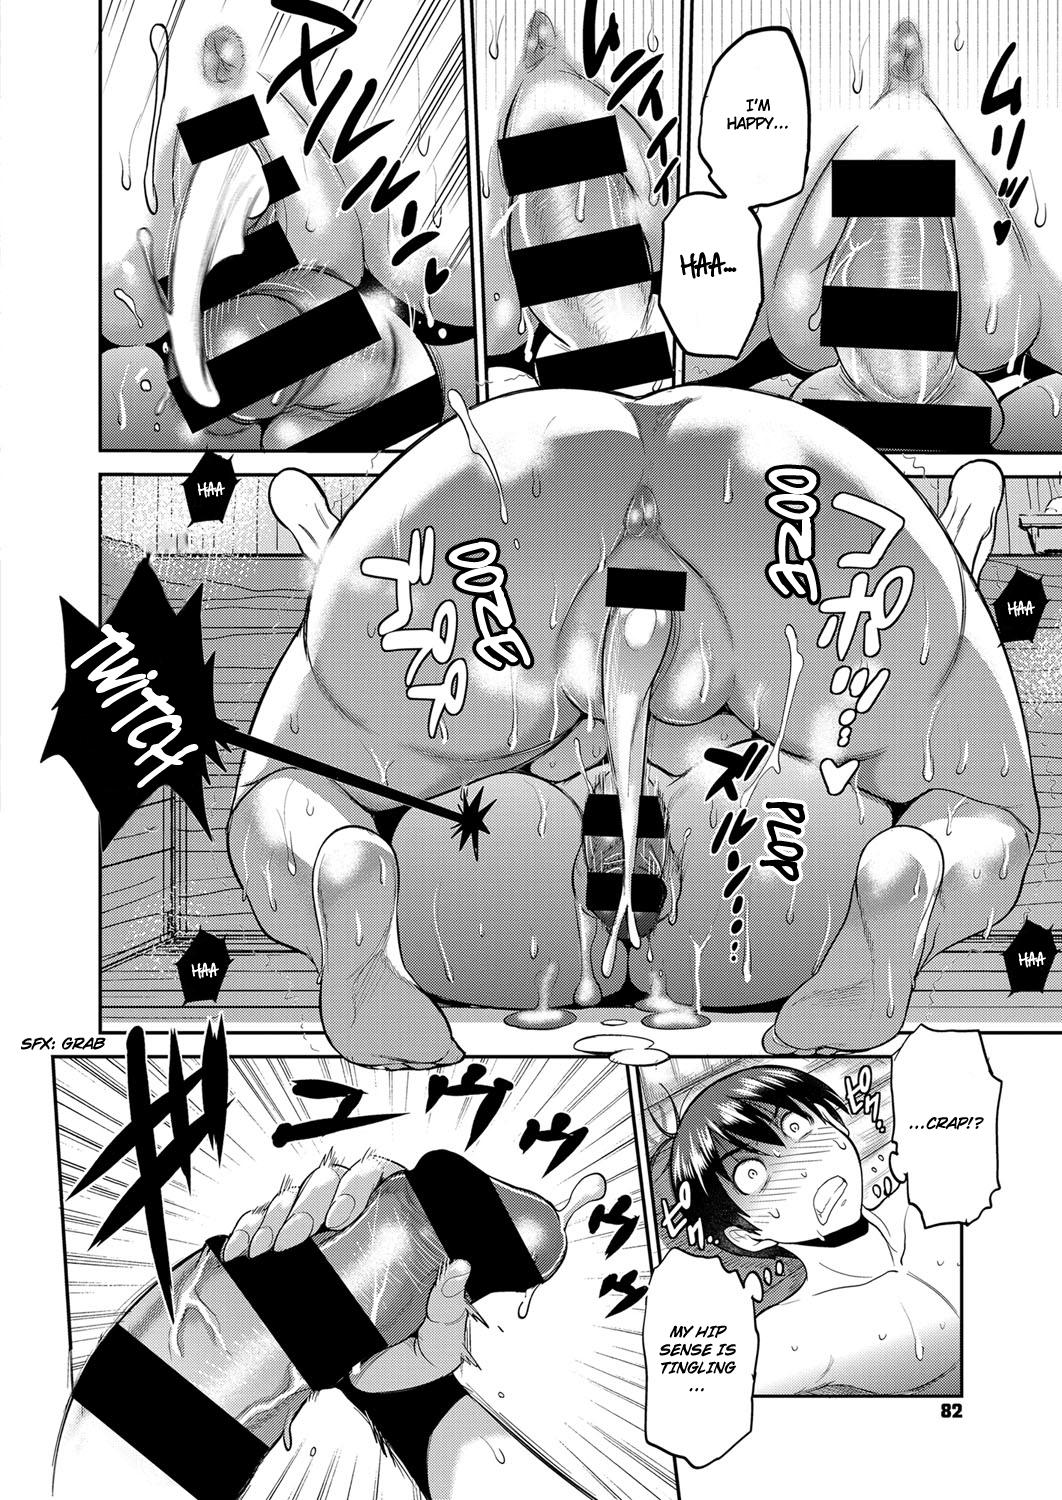 [DISTANCE] Joshi Lacu! - Girls Lacrosse Club ~2 Years Later~ Ch. 2 (COMIC ExE 03) [English] [TripleSevenScans] [Digital] 33